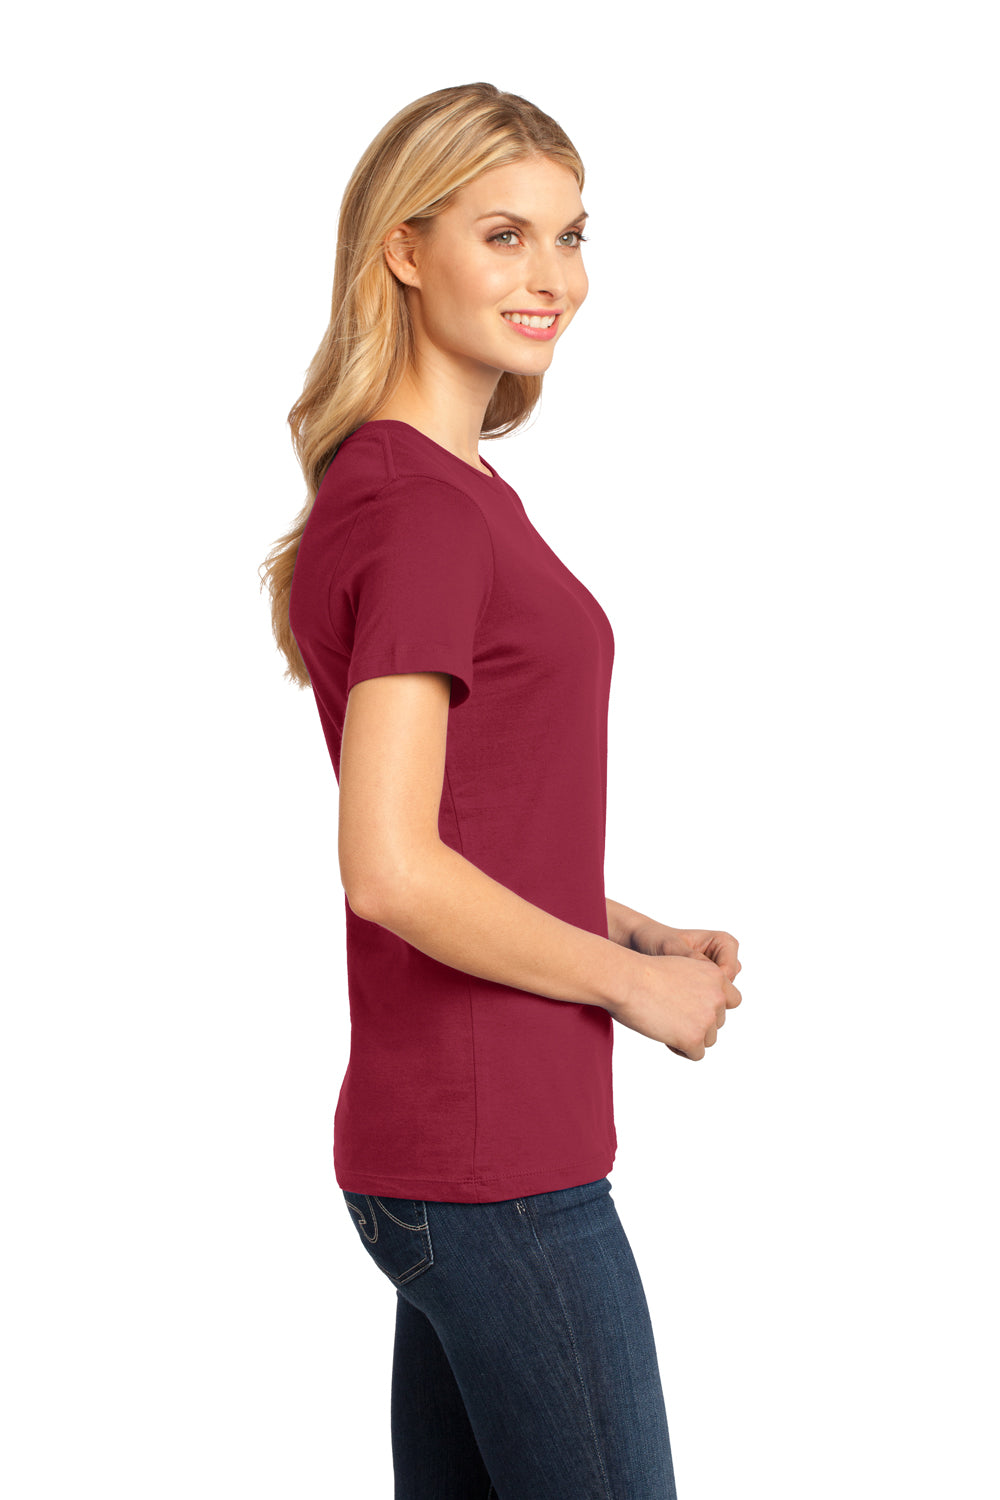 District DM104L Womens Perfect Weight Short Sleeve Crewneck T-Shirt Sangria Red Side